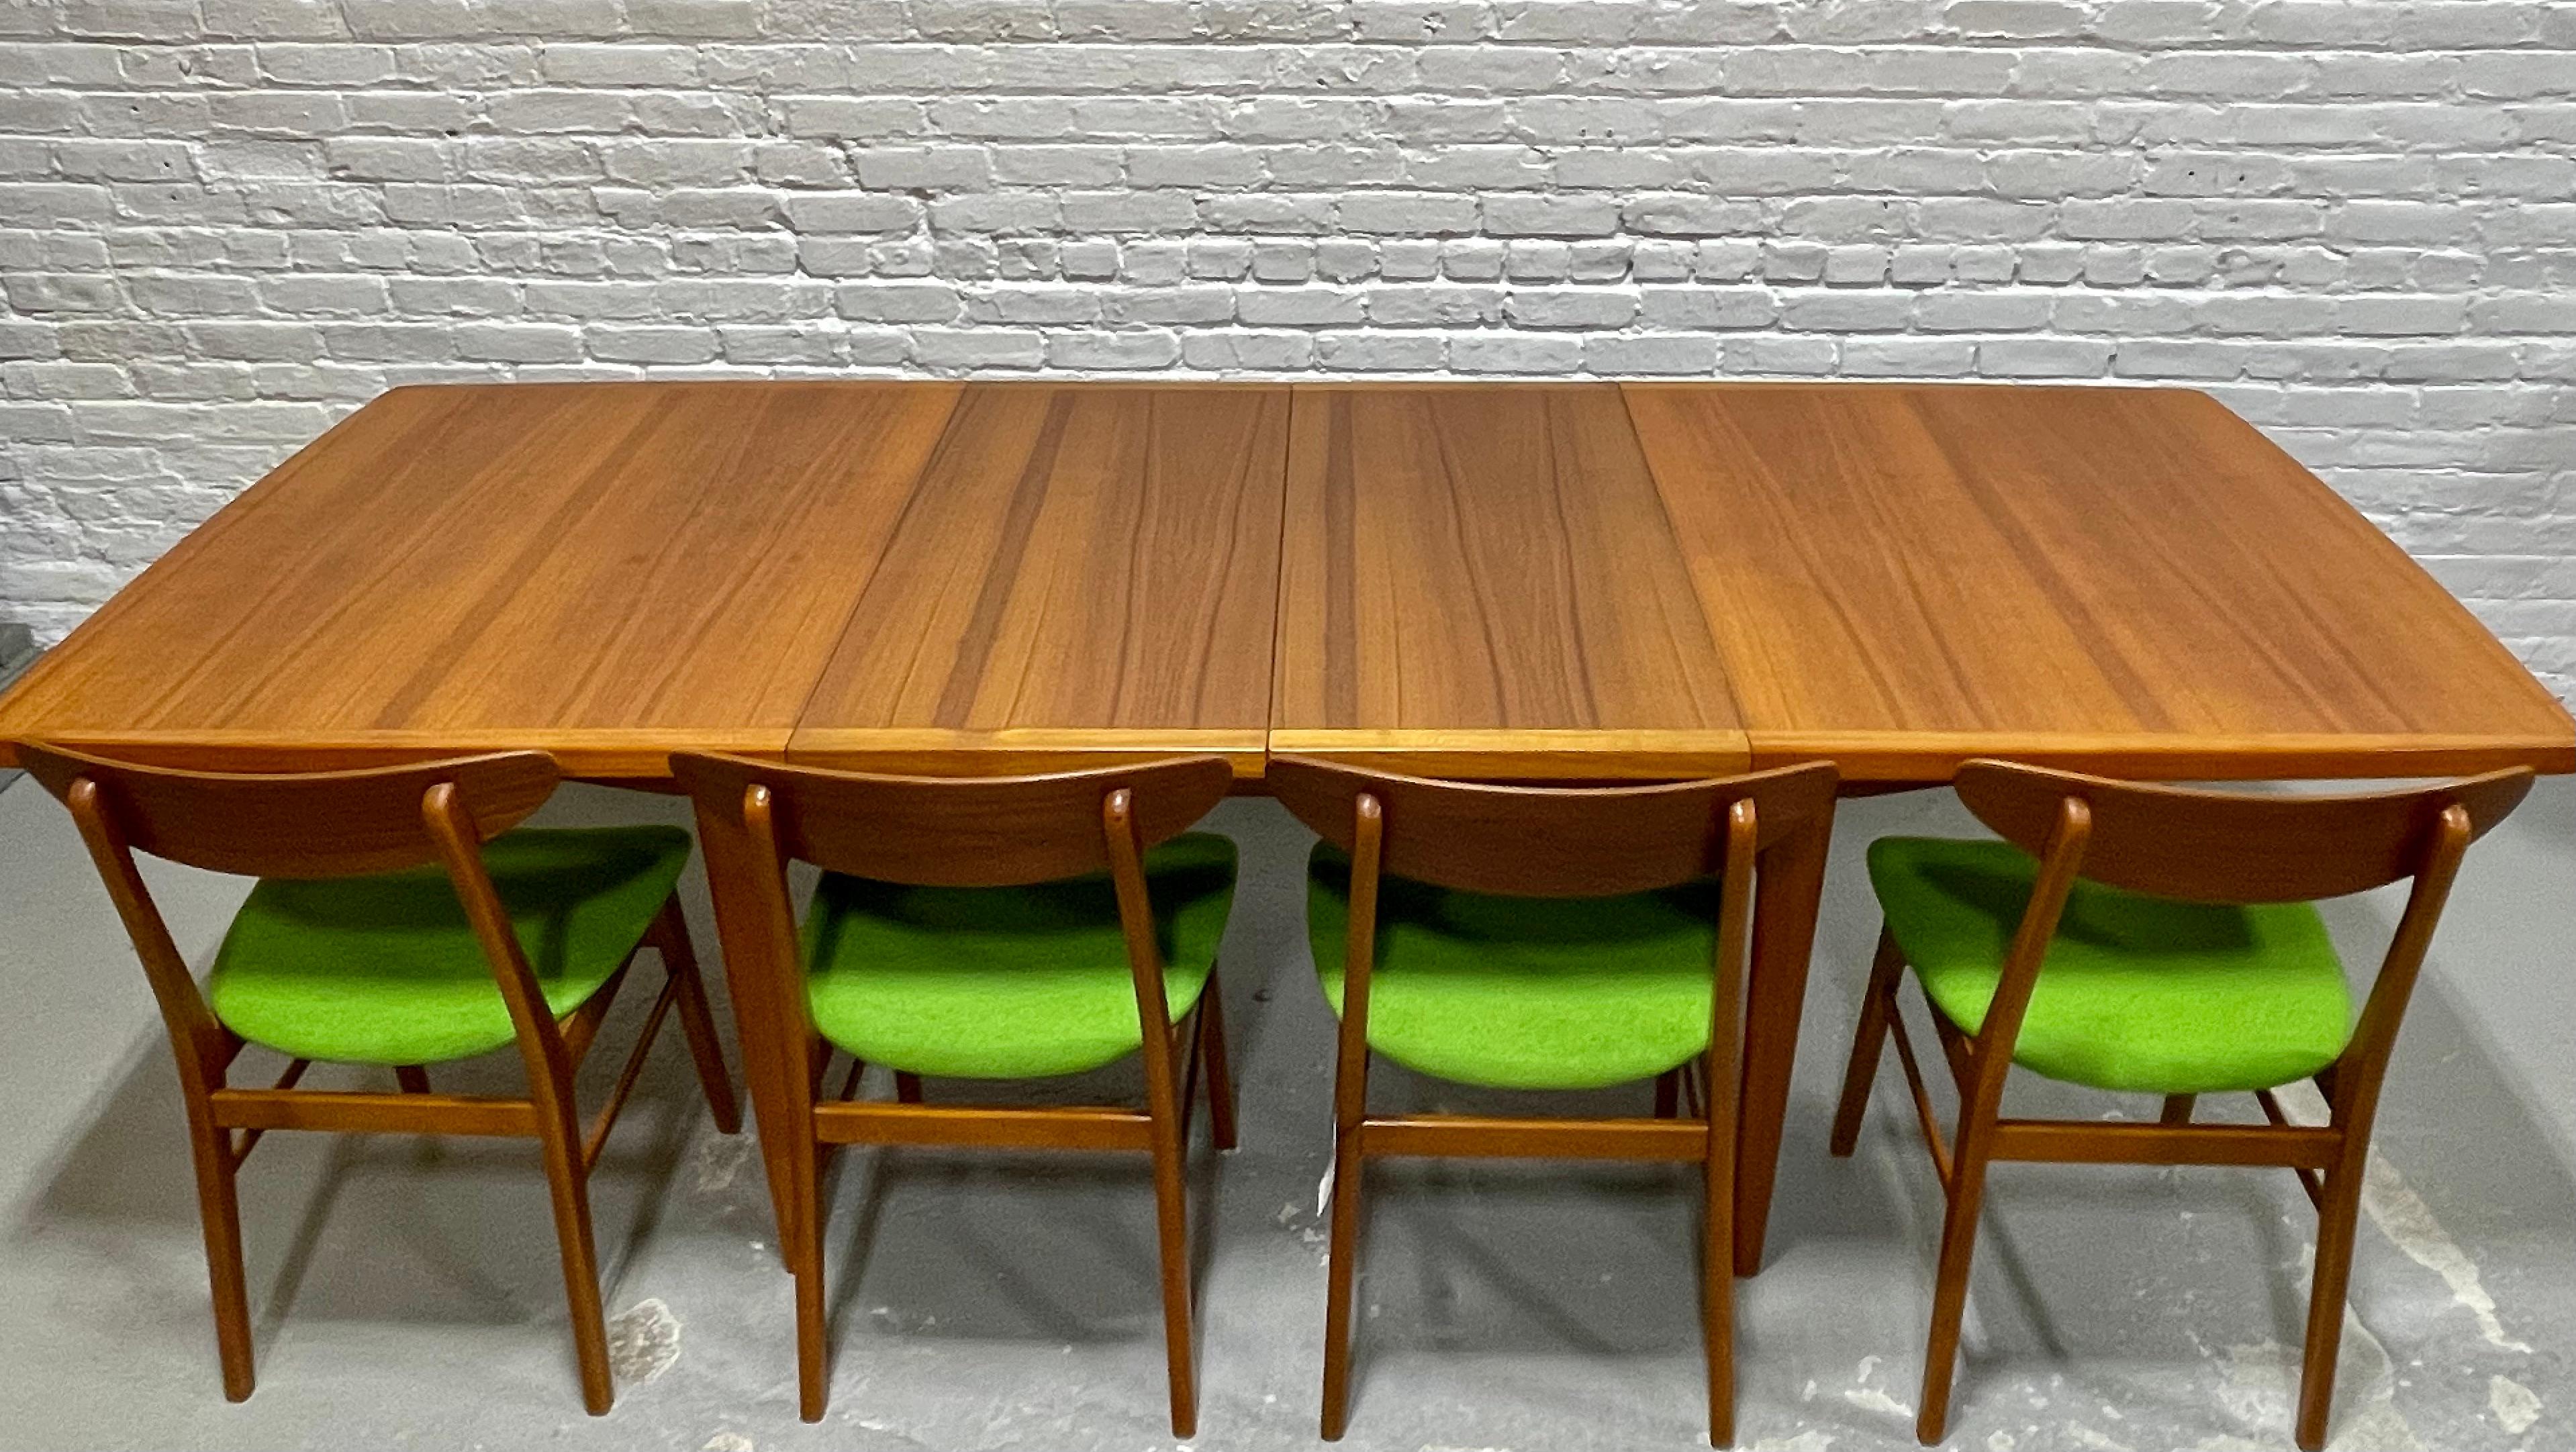 Extra LONG Mid Century MODERN Teak Expandable DINING Table, c. 1960's 6